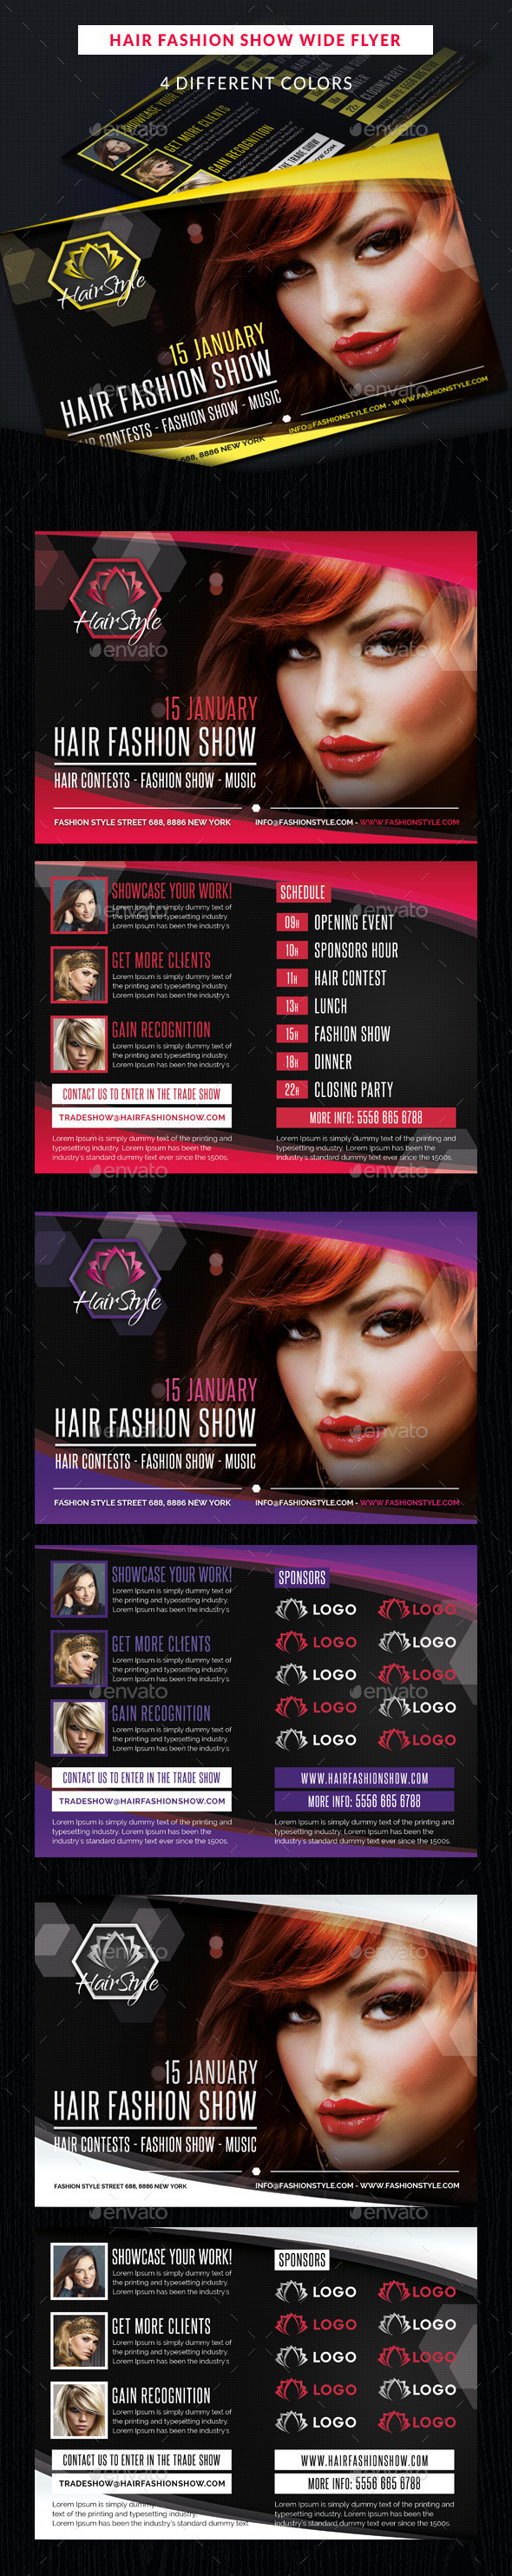 Hair Fashion Show Promotion Wide Flyer